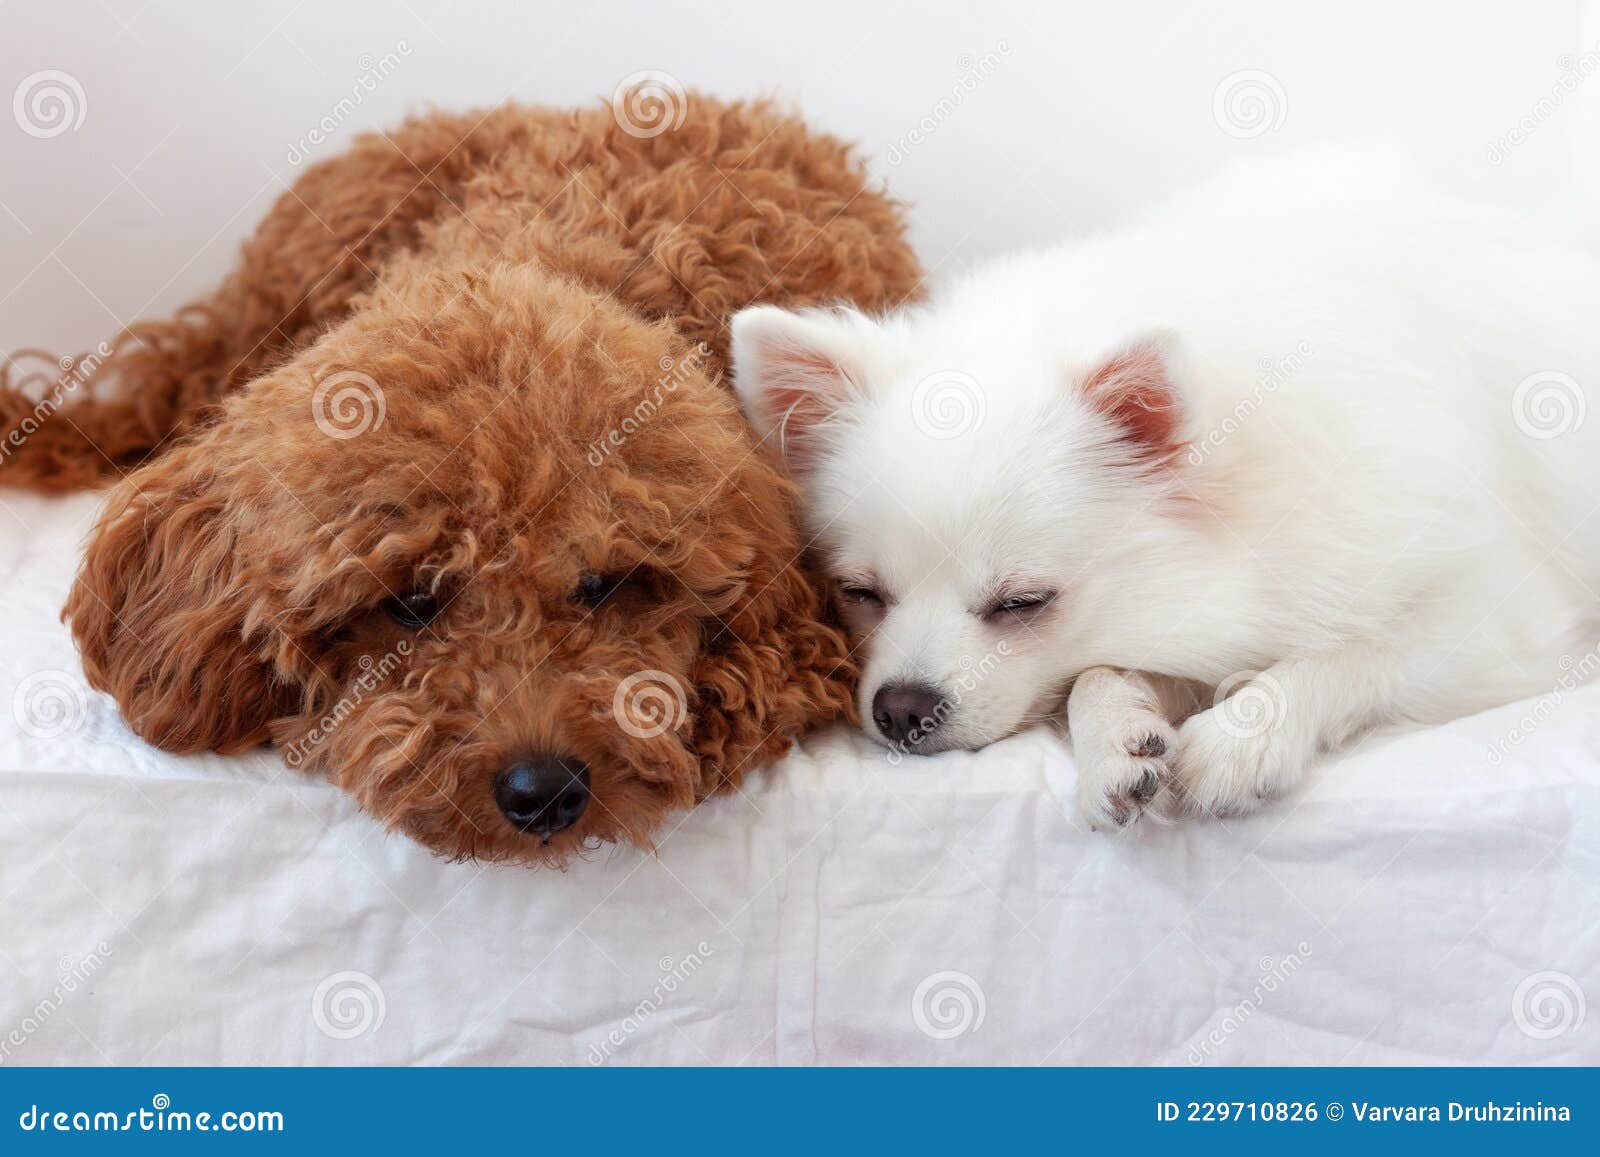 Two Small Dogs a White Pomeranian and Red Brown a Miniature Poodle Sleep  Next To Each Other Stock Photo - Image of poodle, pomeranian: 229710826